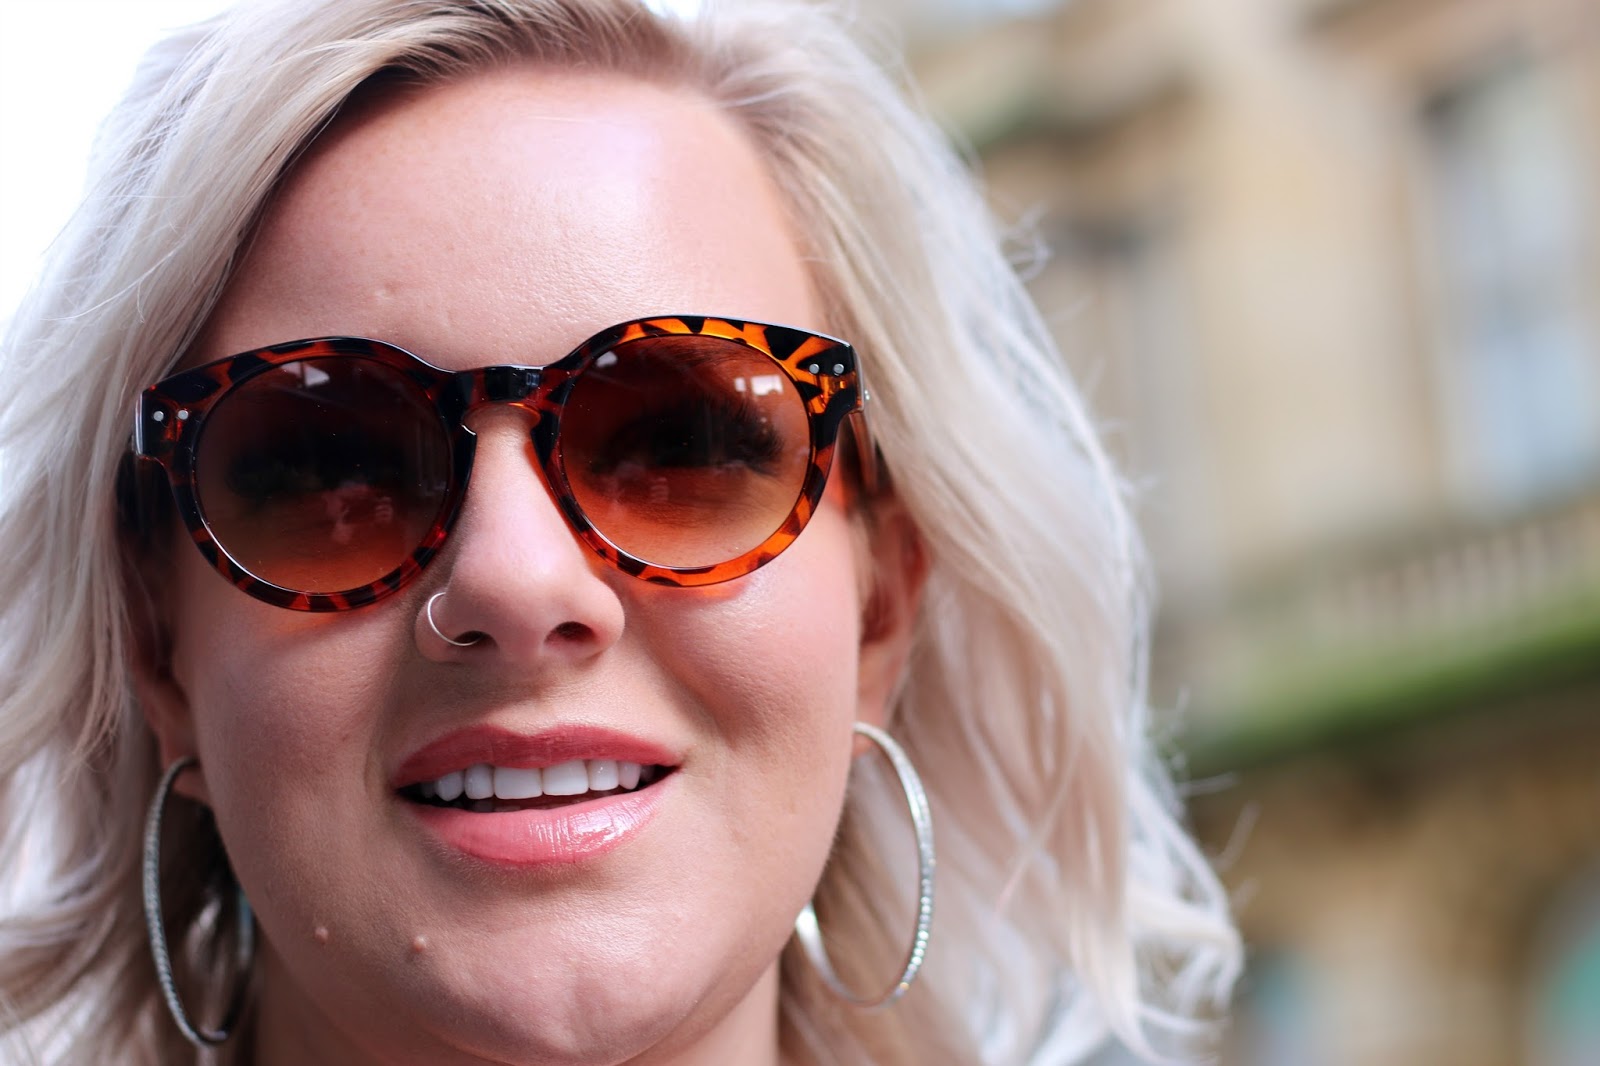 Hipster Sunnies in St Tropez on UK Fashion Blogger WhatLauraLoves